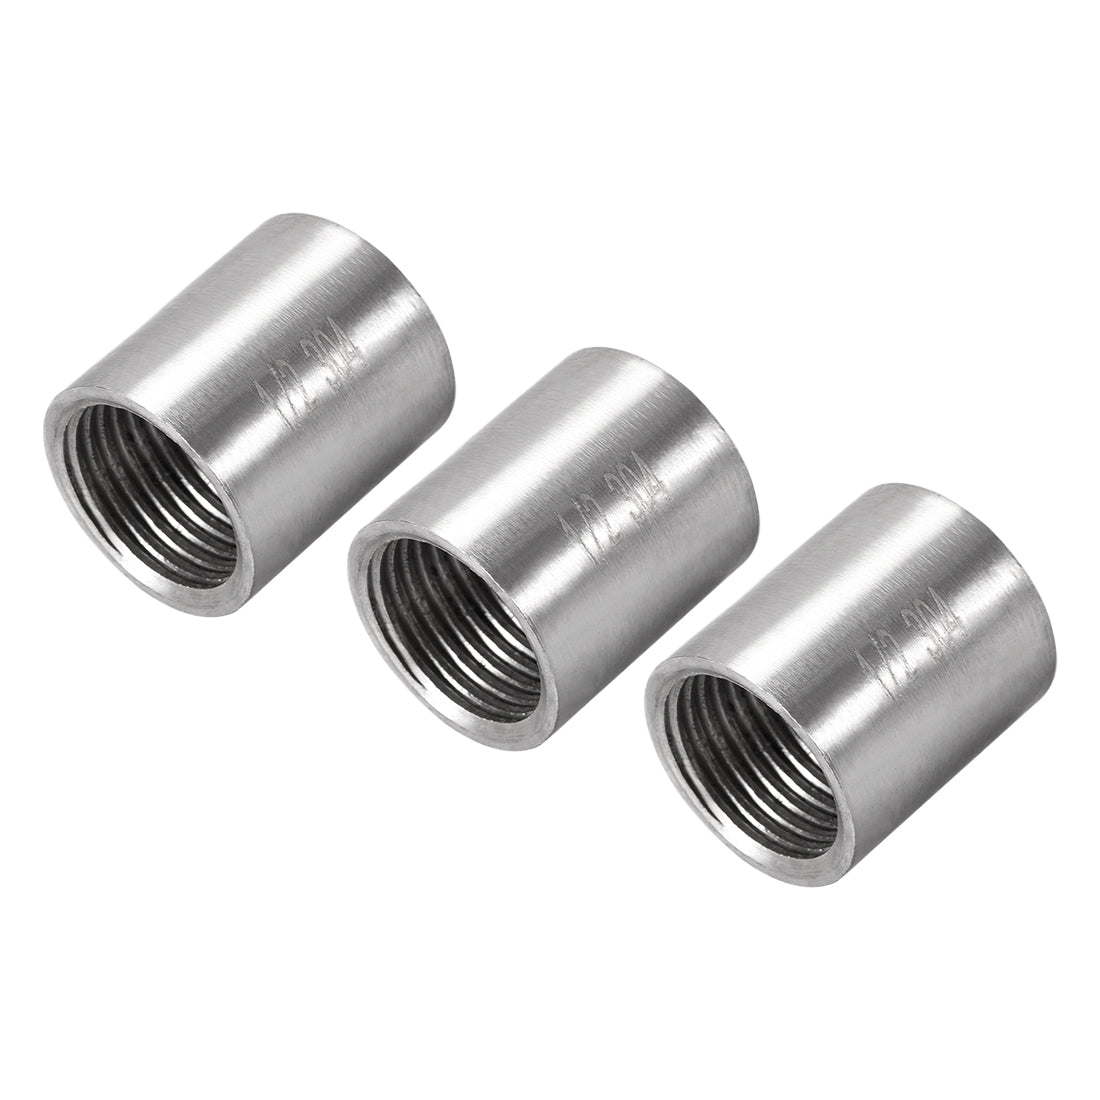 uxcell Uxcell Stainless Steel 304 Cast Pipe Fittings Coupling Fitting 1/2 x 1/2 G Female 3pcs